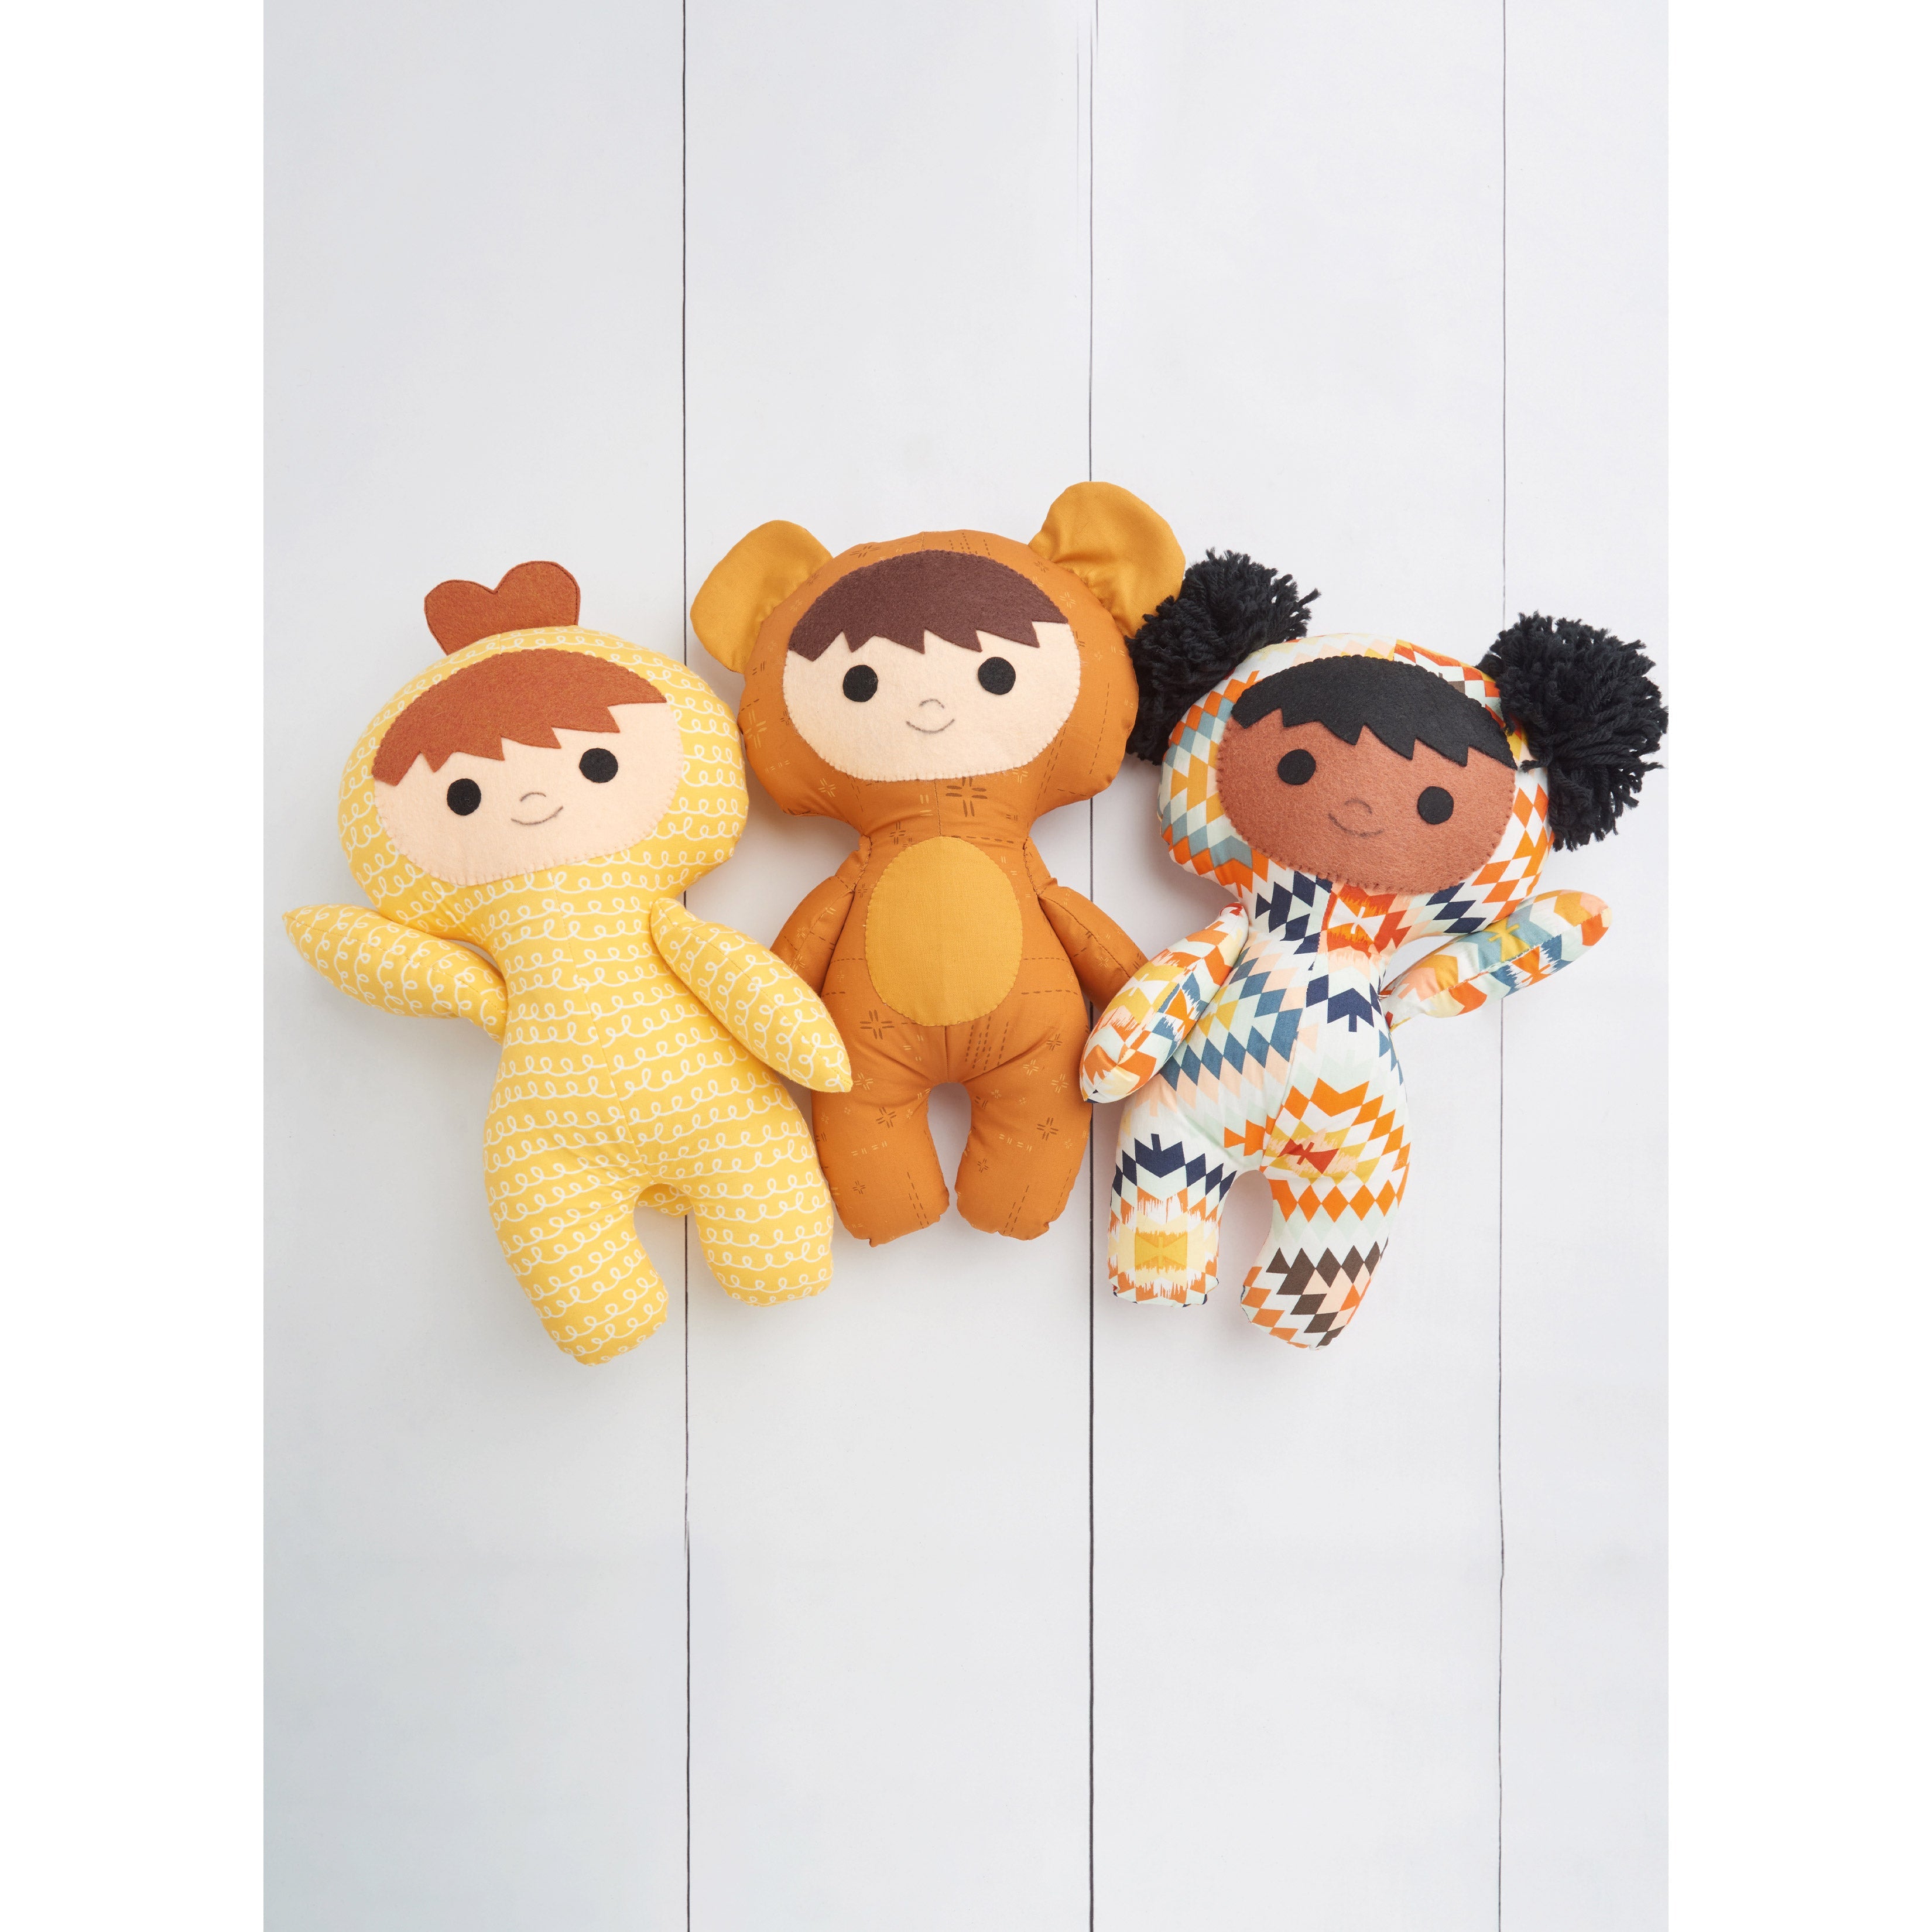 Simplicity pattern 9665 Plush Dolls from Jaycotts Sewing Supplies